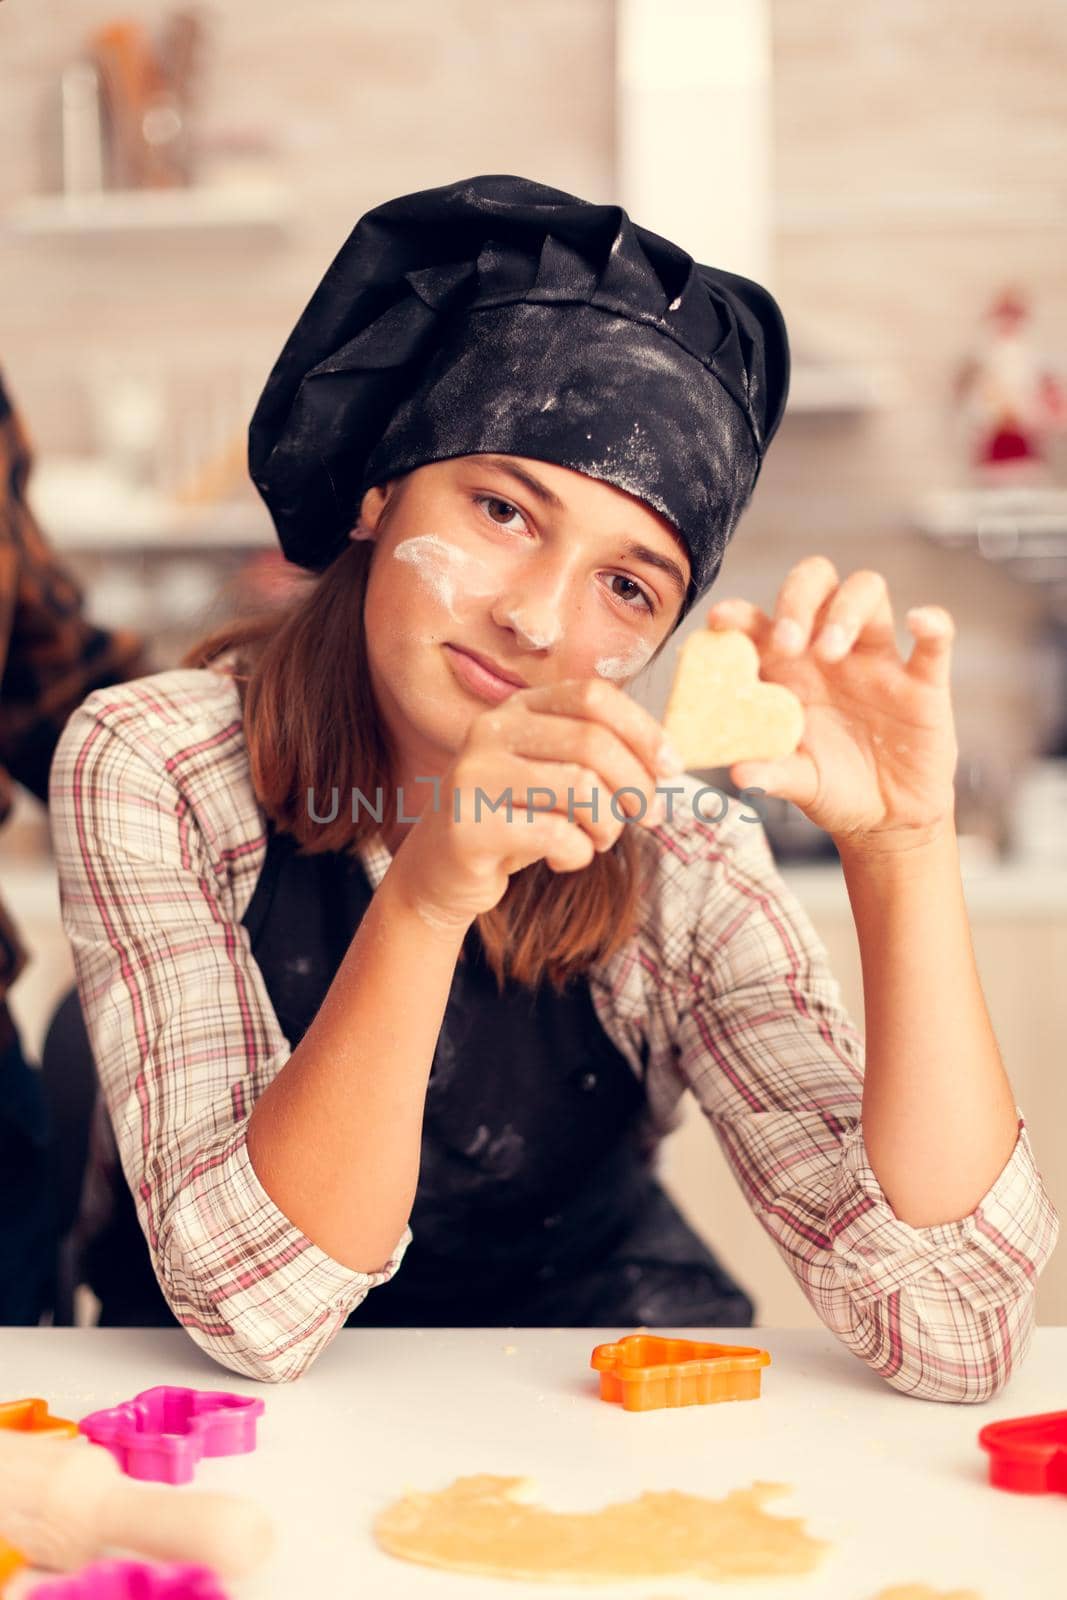 Childs hands with heart shaped pastry on christmas day wearing apron and bonette. Happy cheerful joyfull teenage girl helping senior woman preparing sweet cookies to celebrate winter holidays.